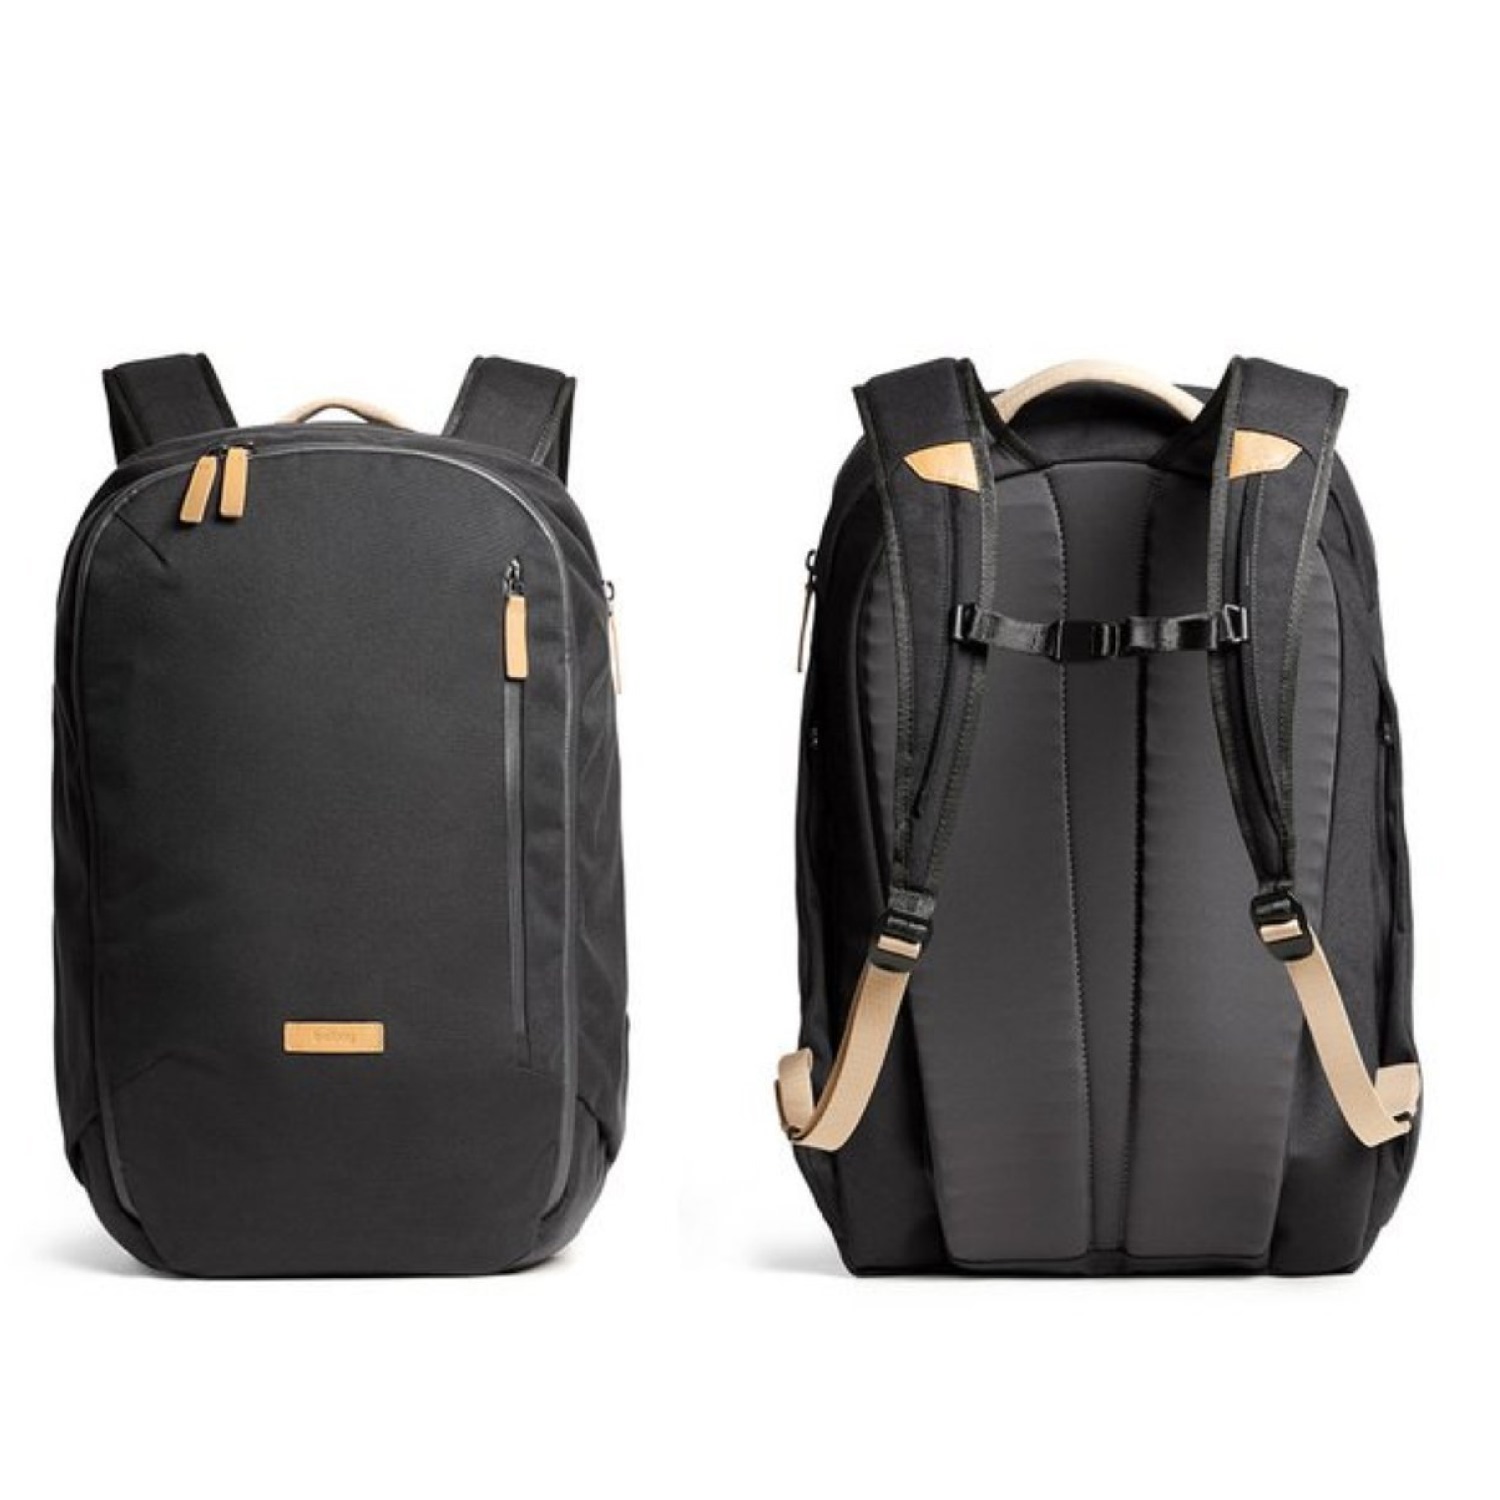 Bellroy Transit Backpack - Charcoal - Seager Inc